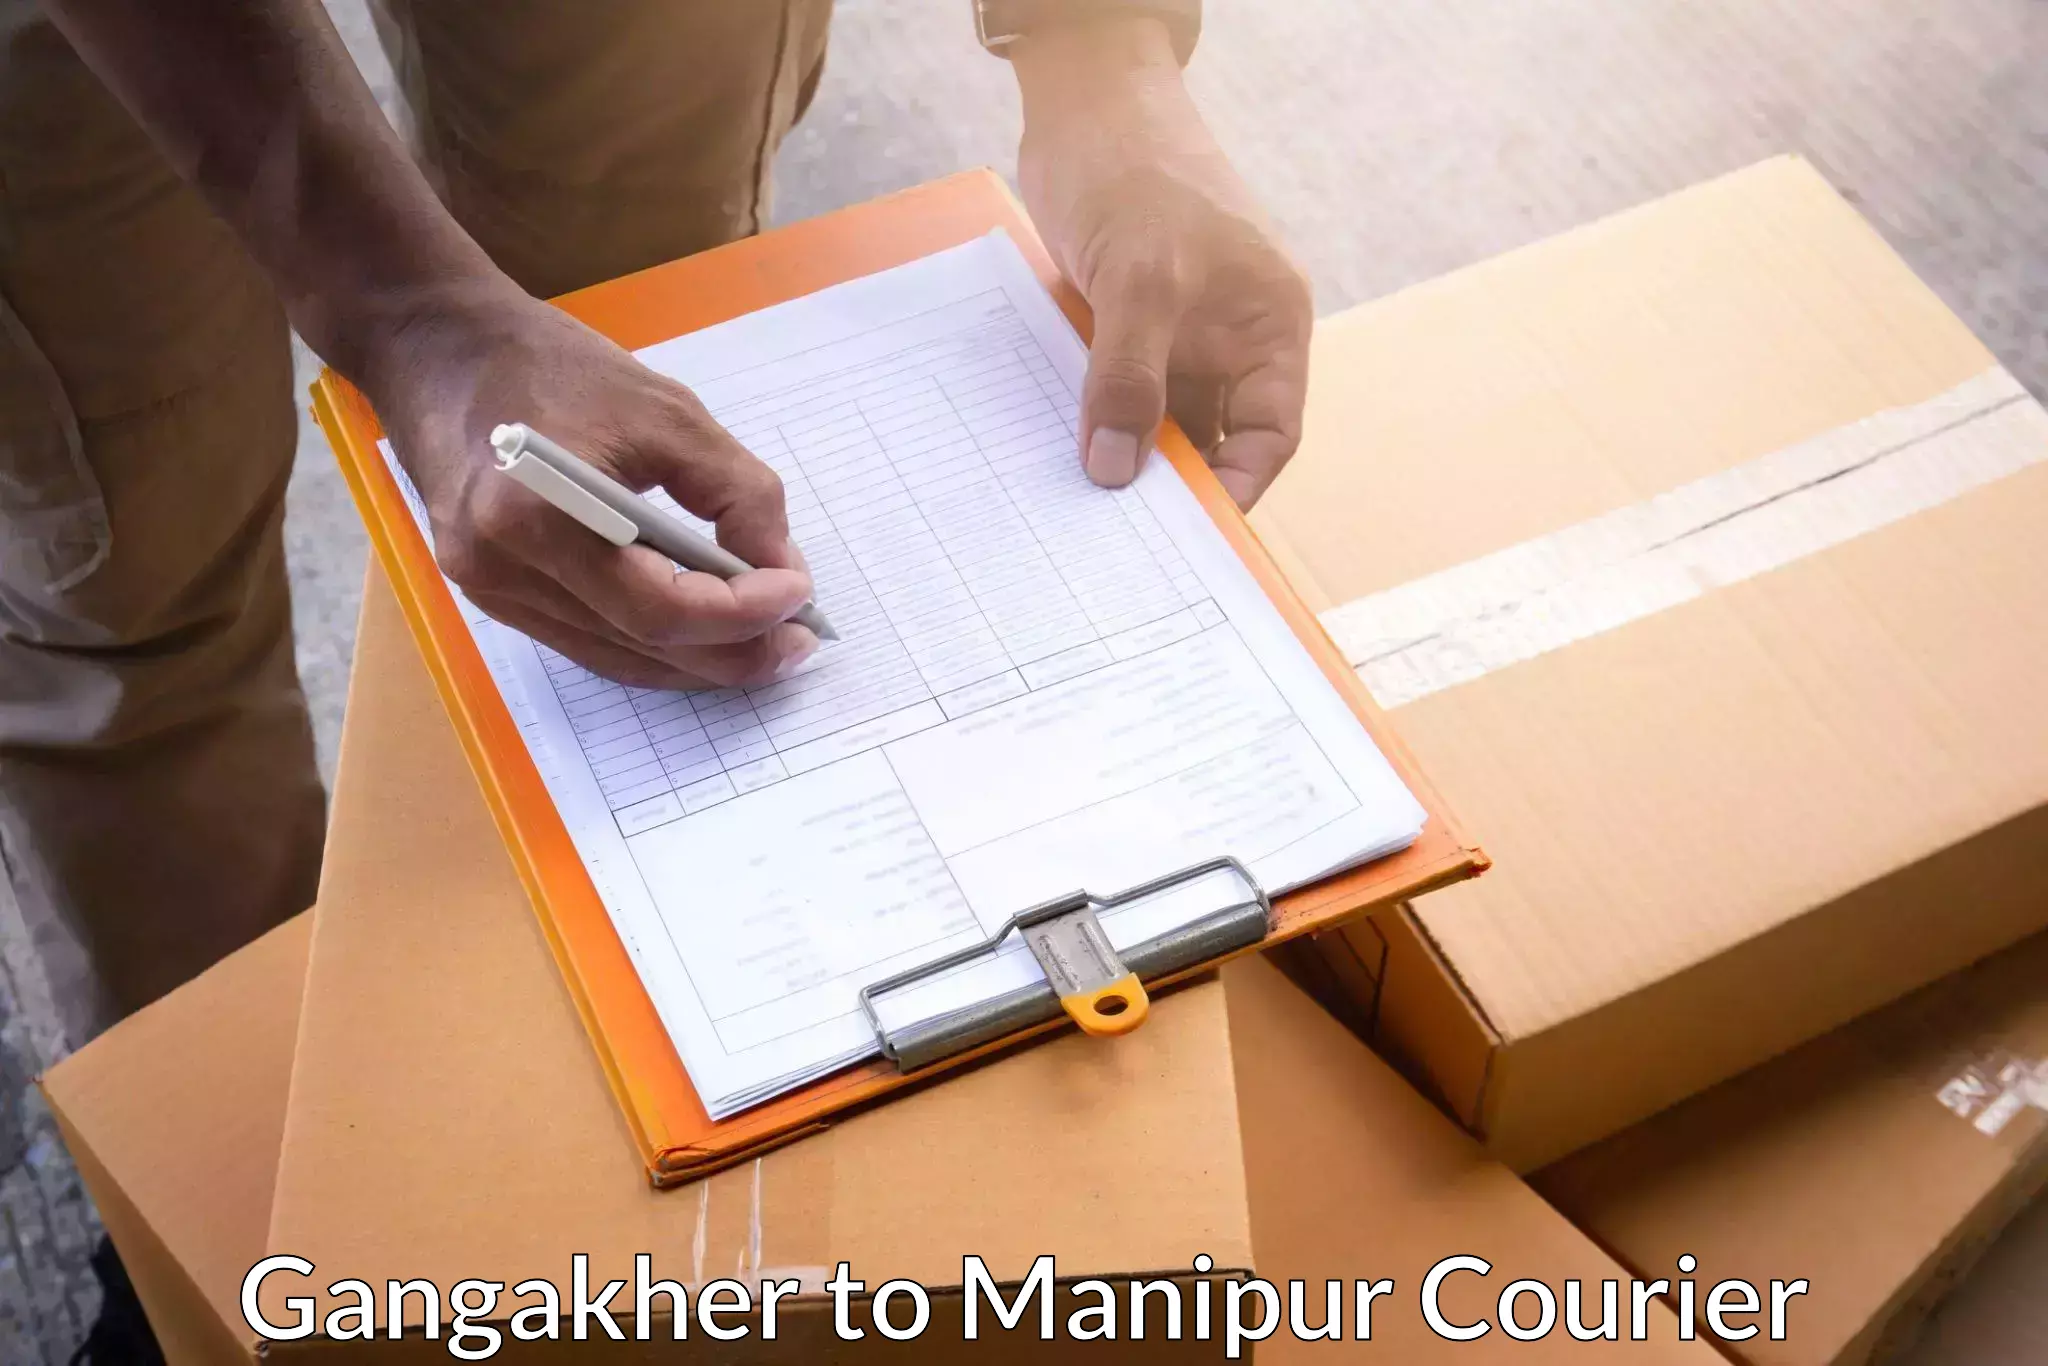 Nationwide delivery network Gangakher to Manipur